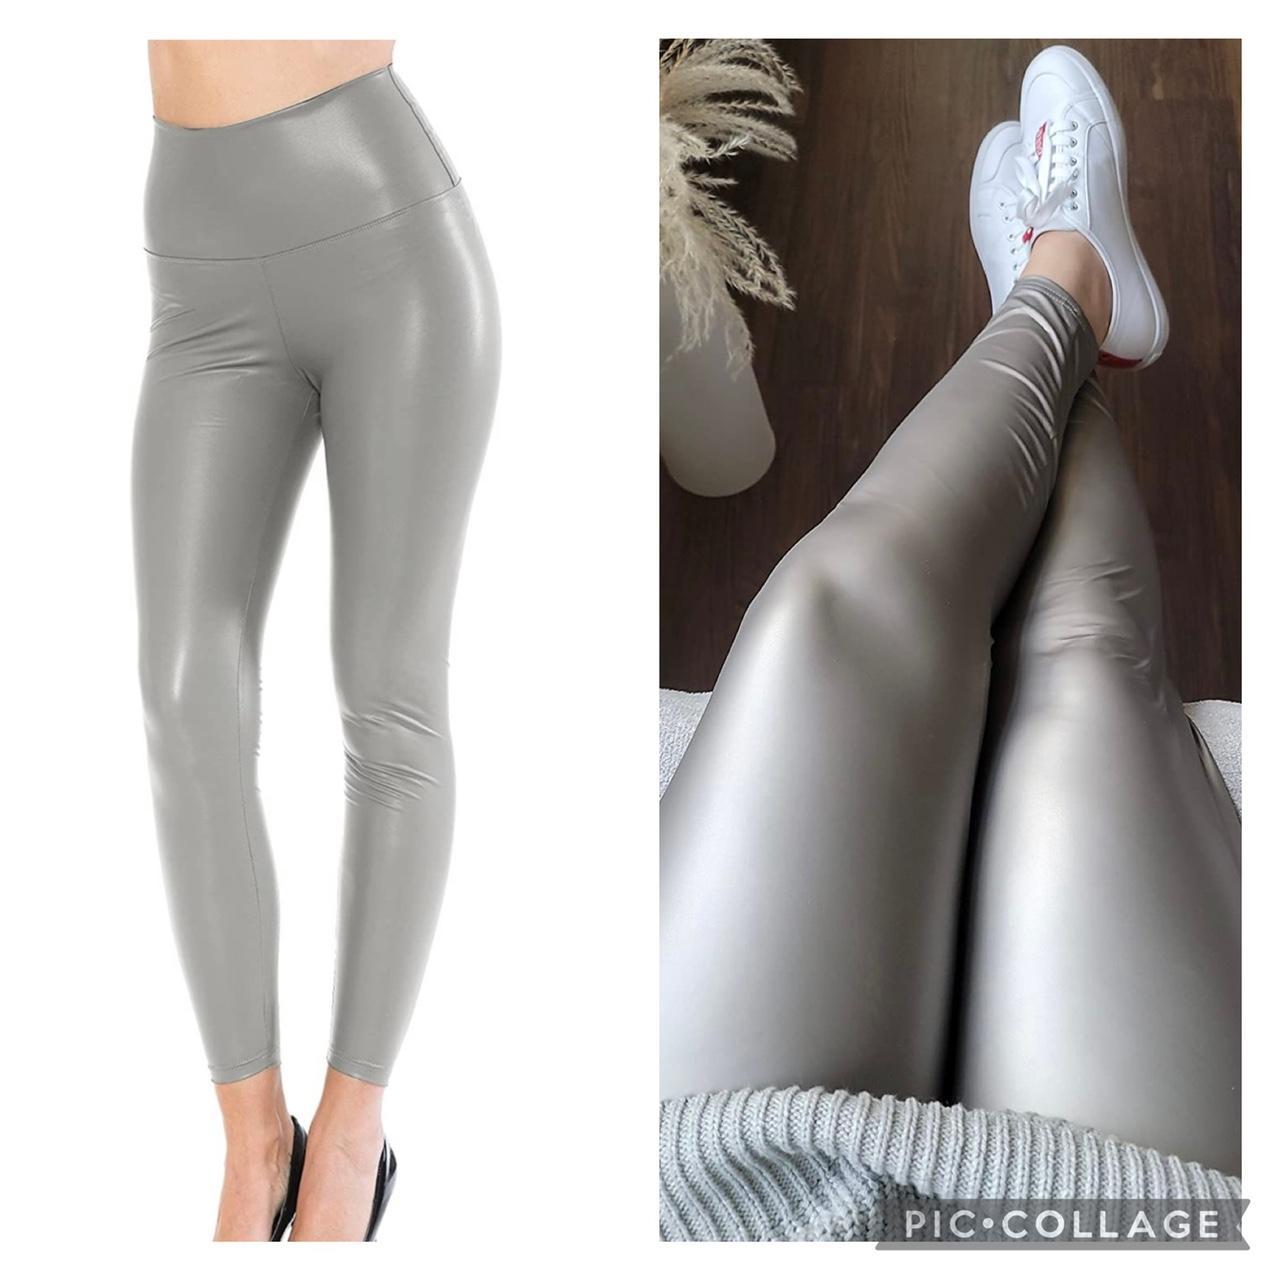 Women’s Faux Leather Pants, High Waisted Leggings